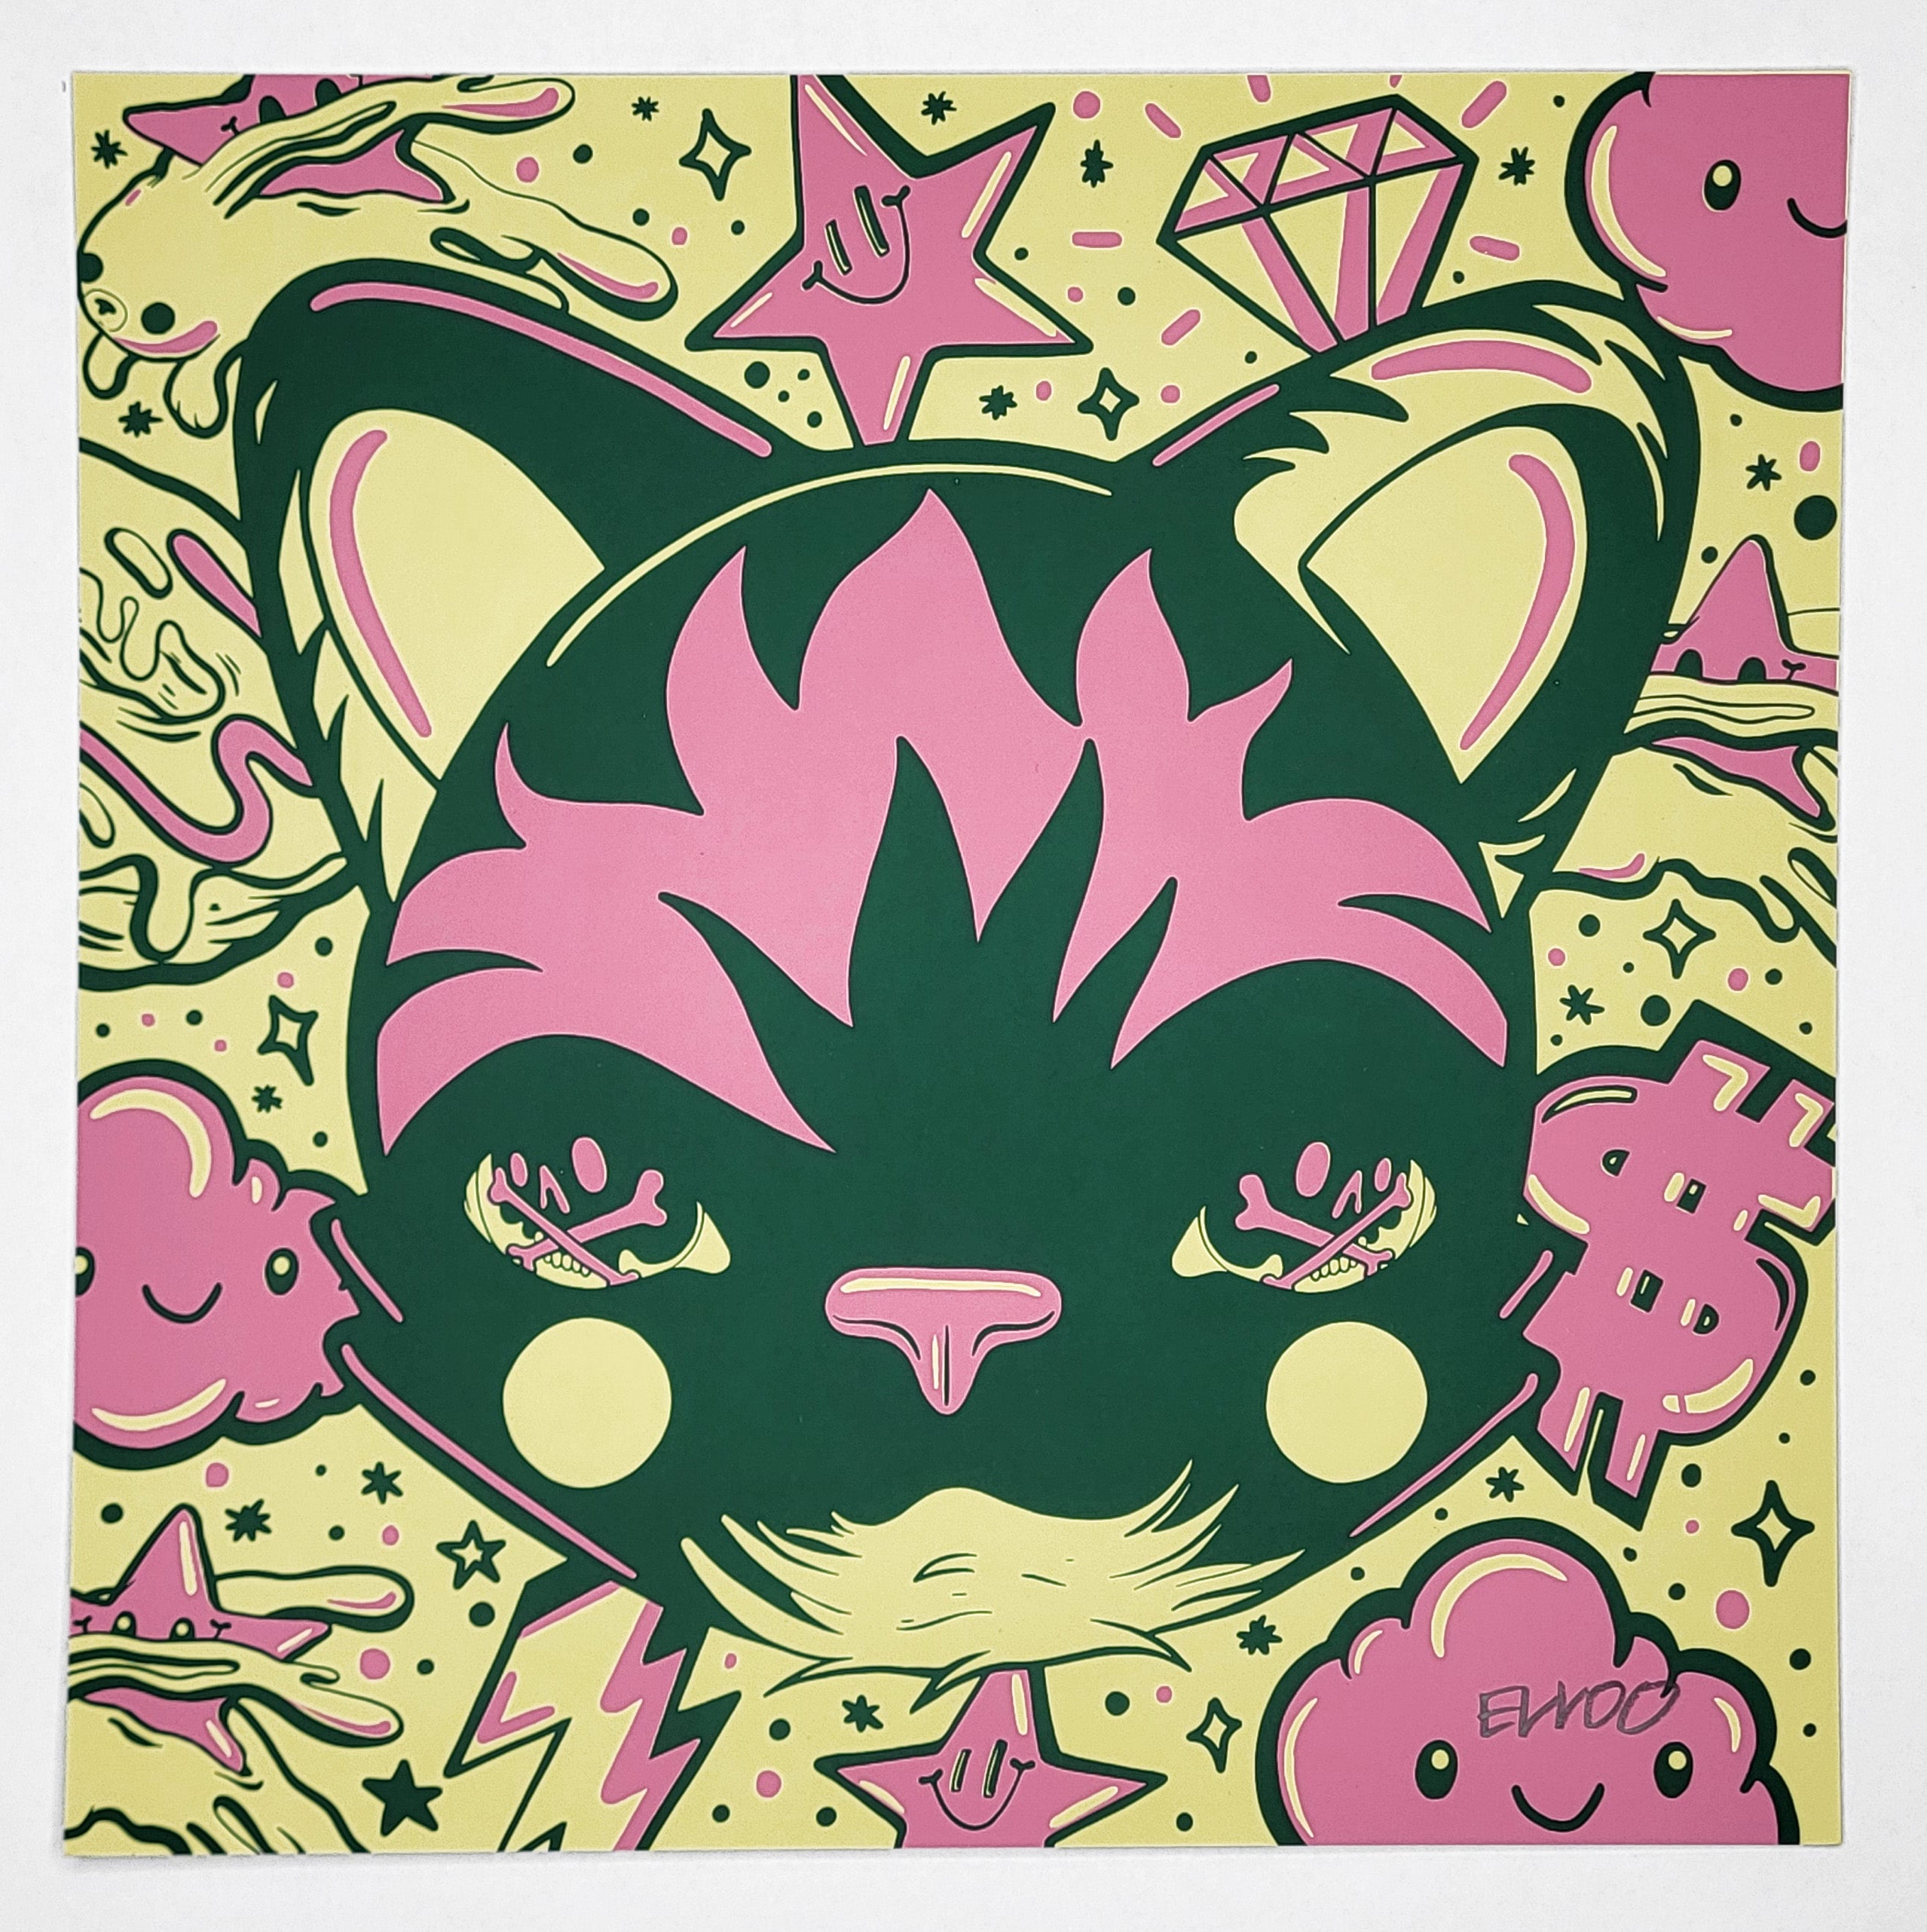 "Cat Yellow and Pink #44" by Elloo